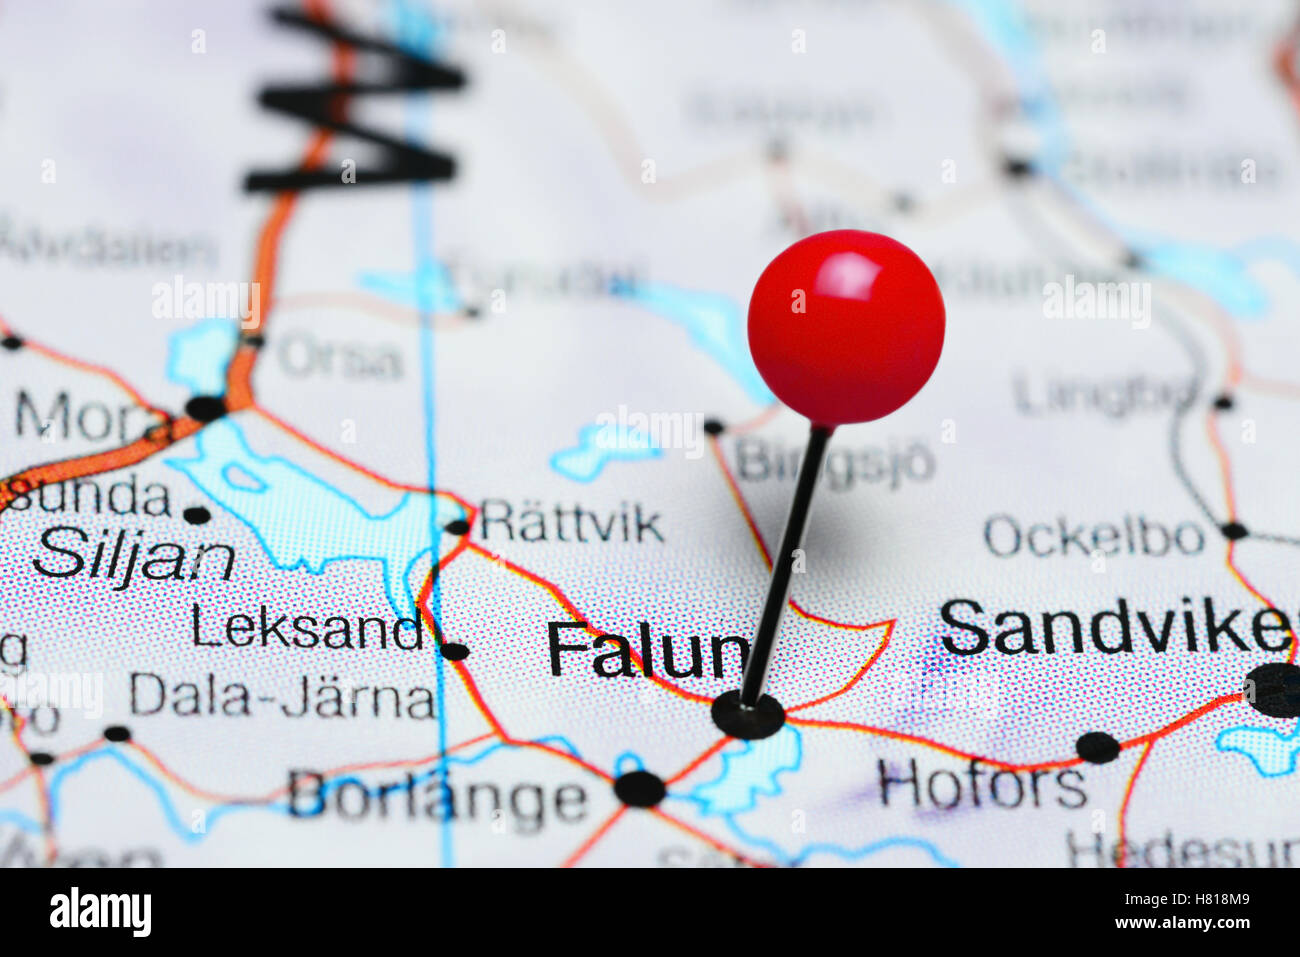 Falun pinned on a map of Sweden Stock Photo